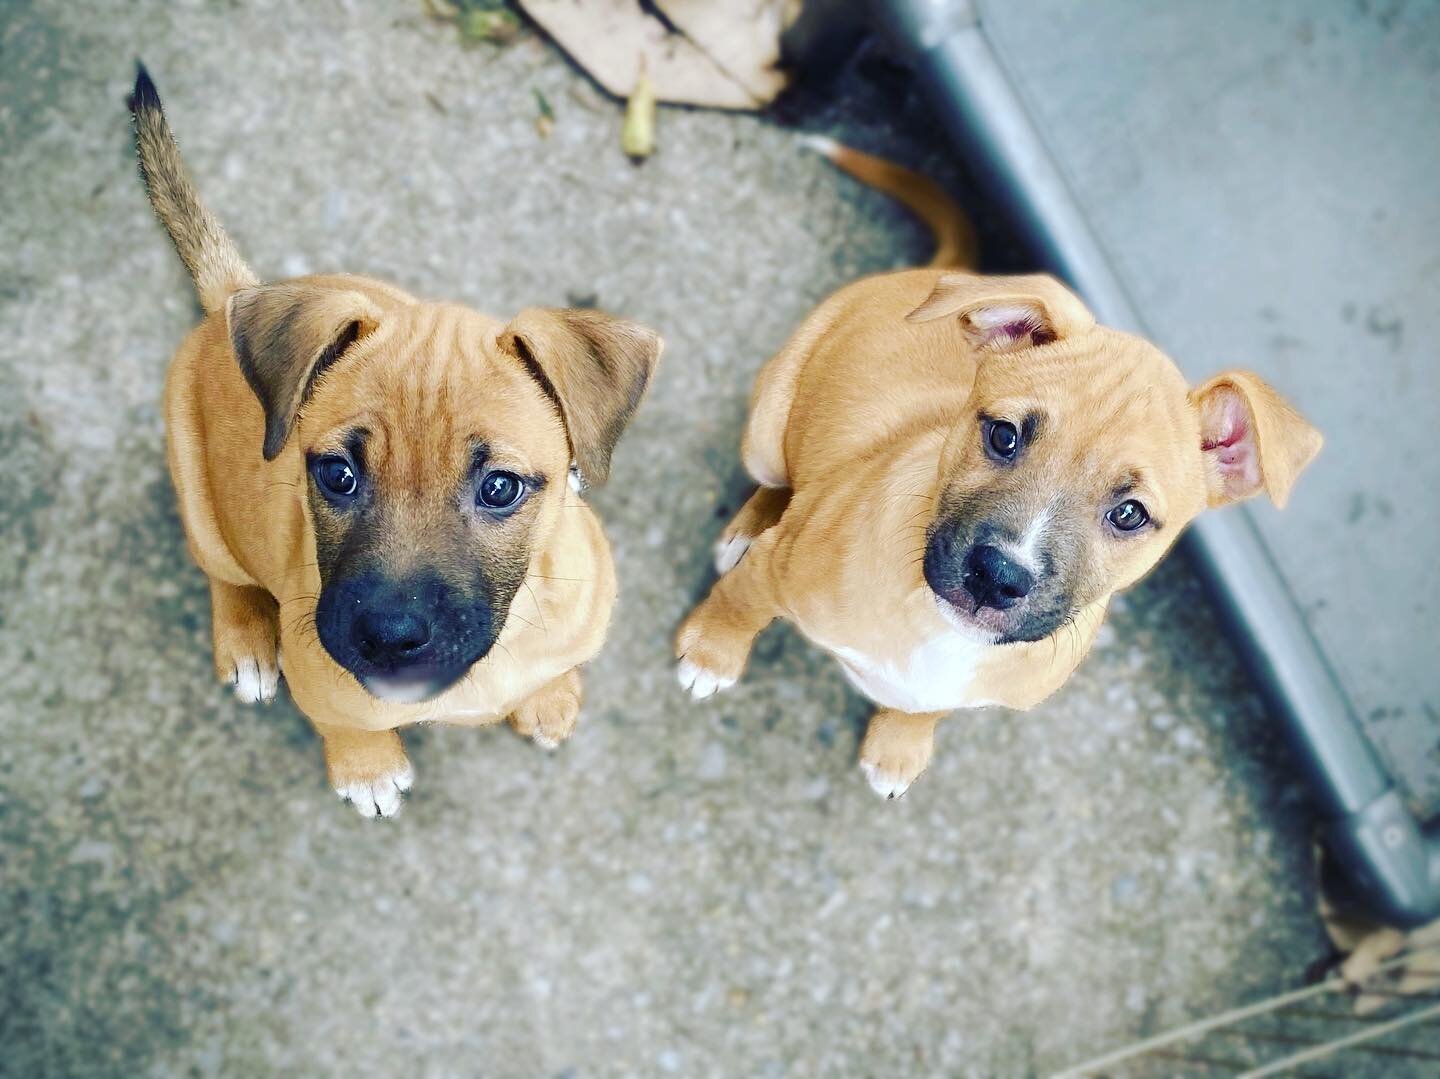 These are the two adorable faces 🐶🐶 watching my every move these past couple of weeks. I think I taught them both to sit just so I could take clearer pictures of their cuteness 😁❤️❤️

#puppydogeyes #citydogsrescue #citydogs #citypuppy #dcadoptable